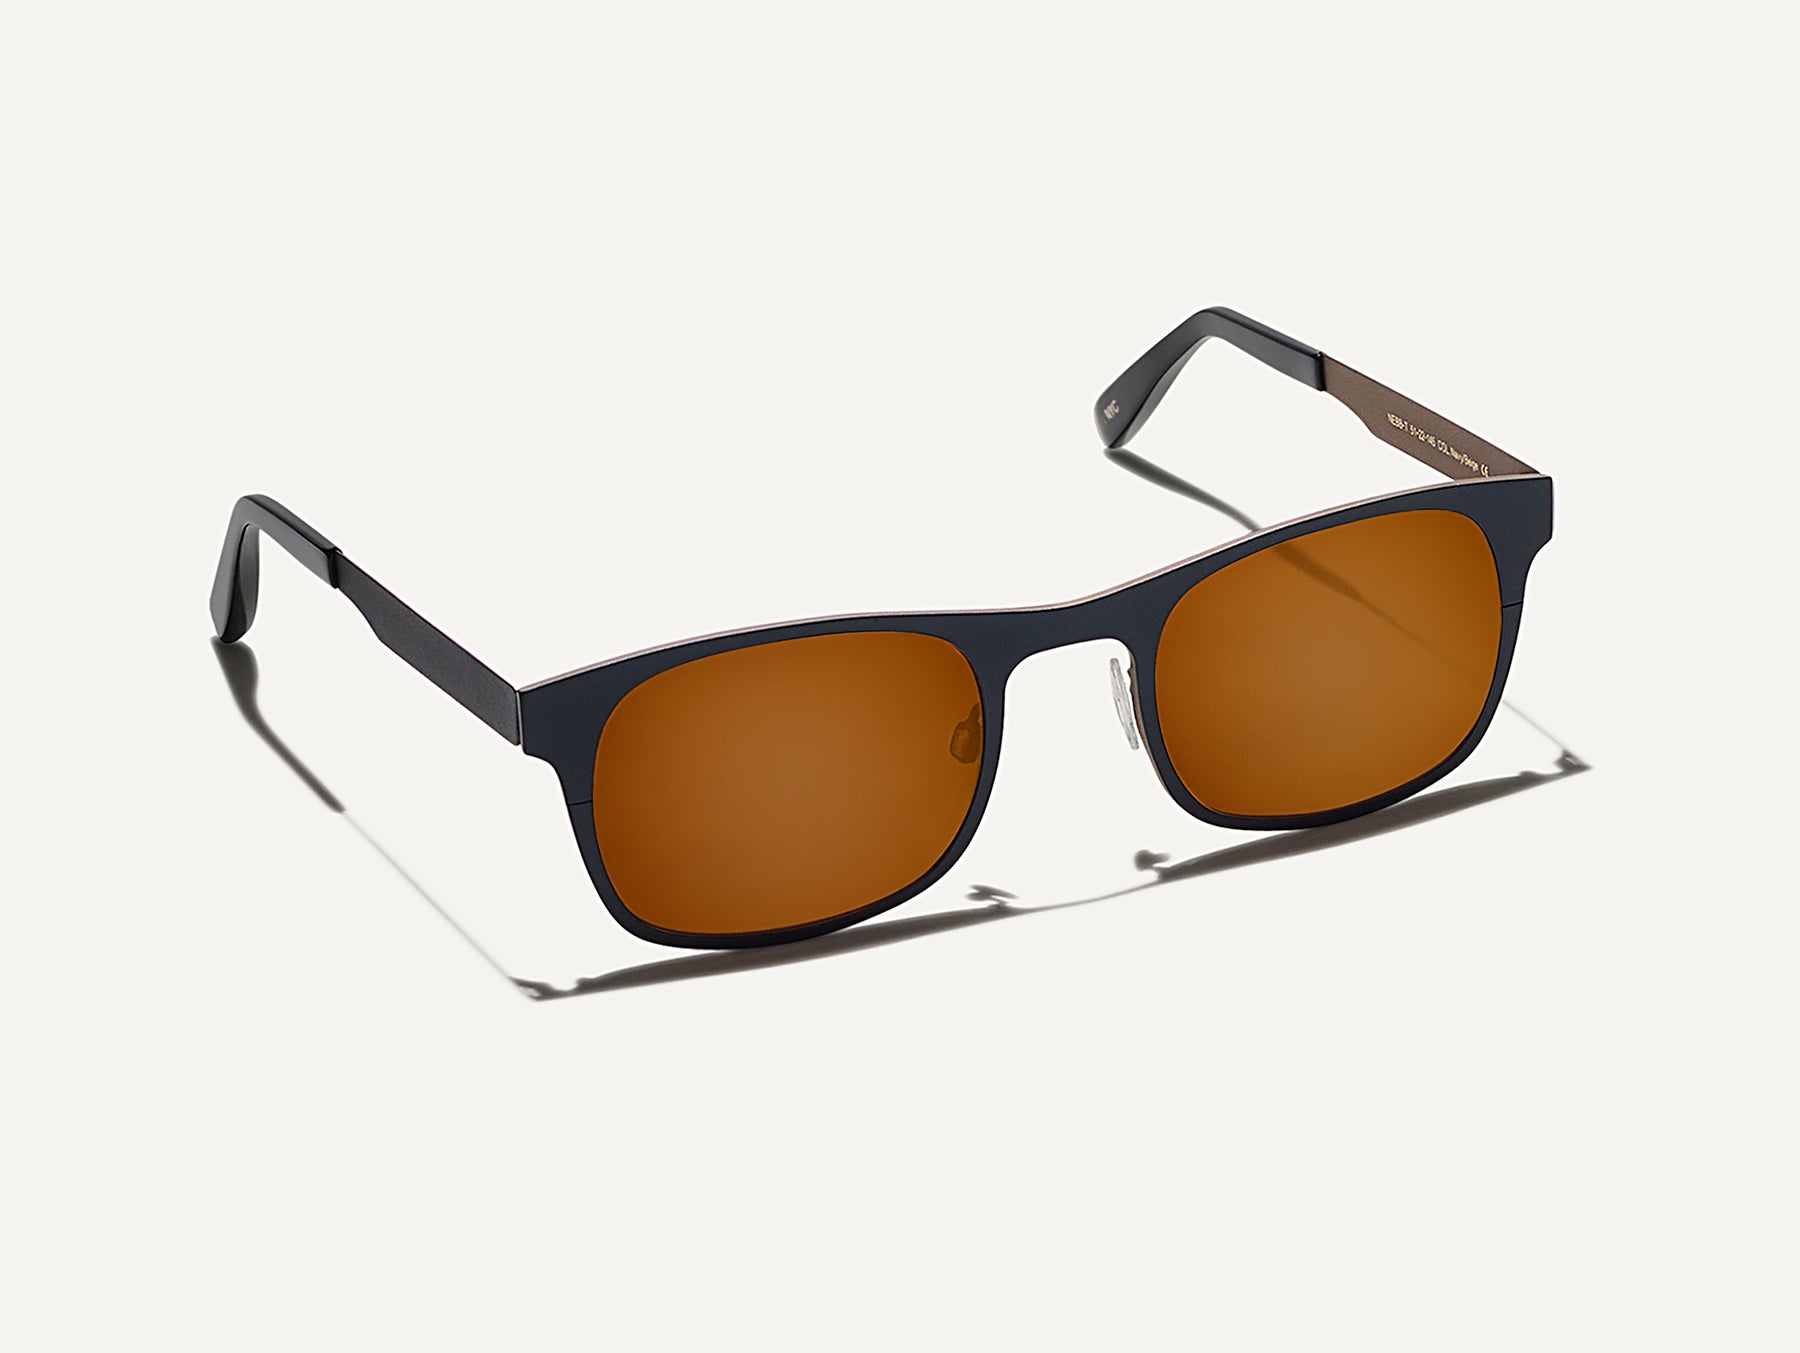 The NEBB-T in Navy/Beige with Brown Flash Lenses